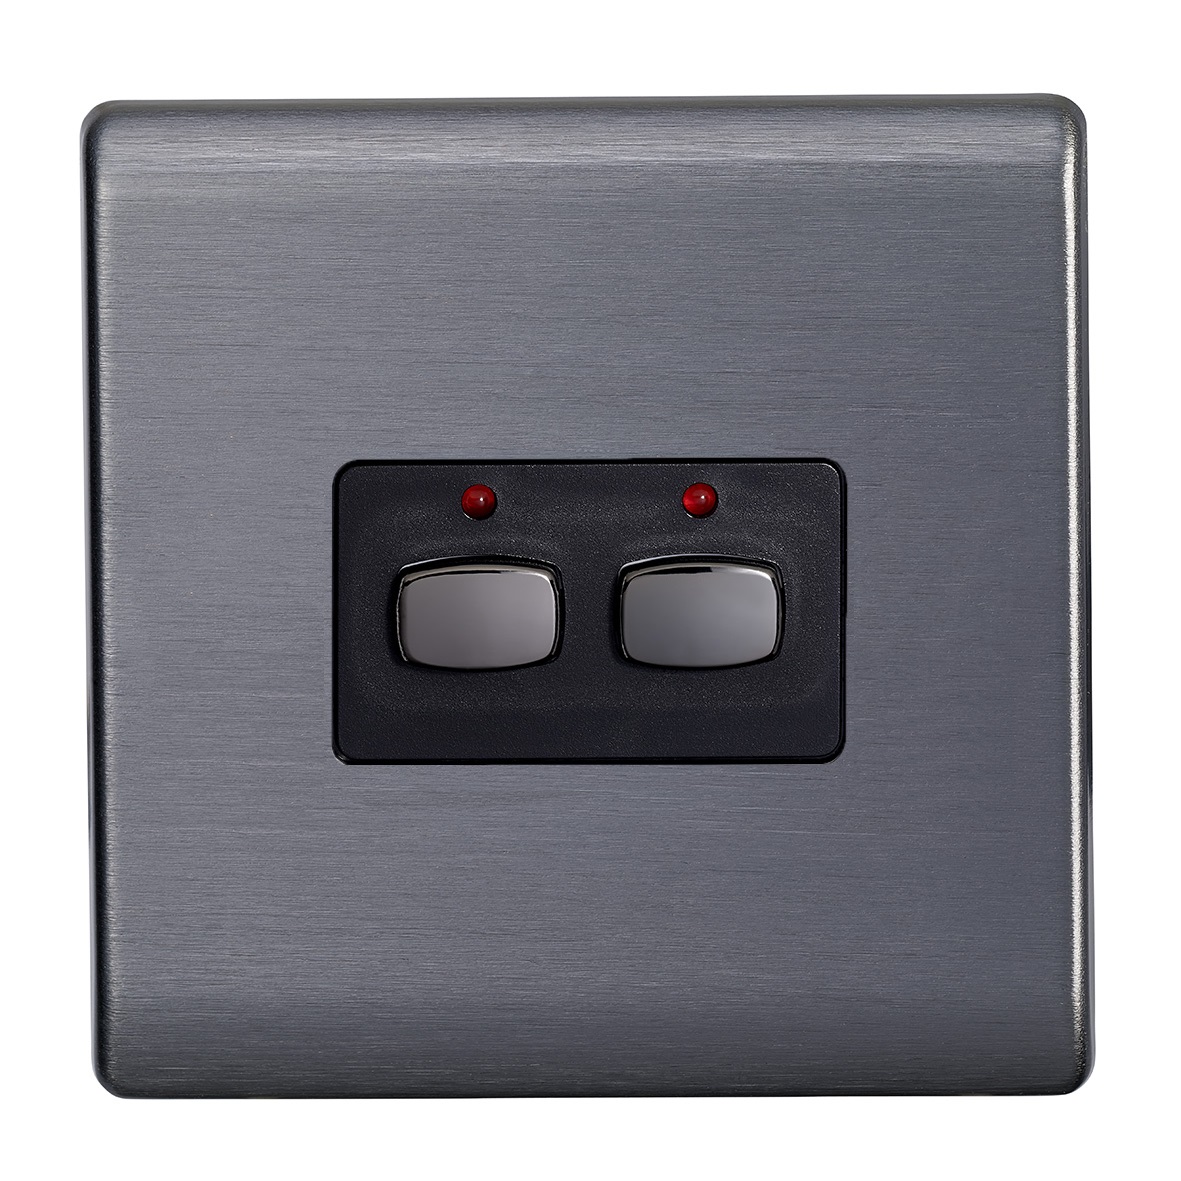 Smart 6mm master/slave two gang Light Switch Graphite